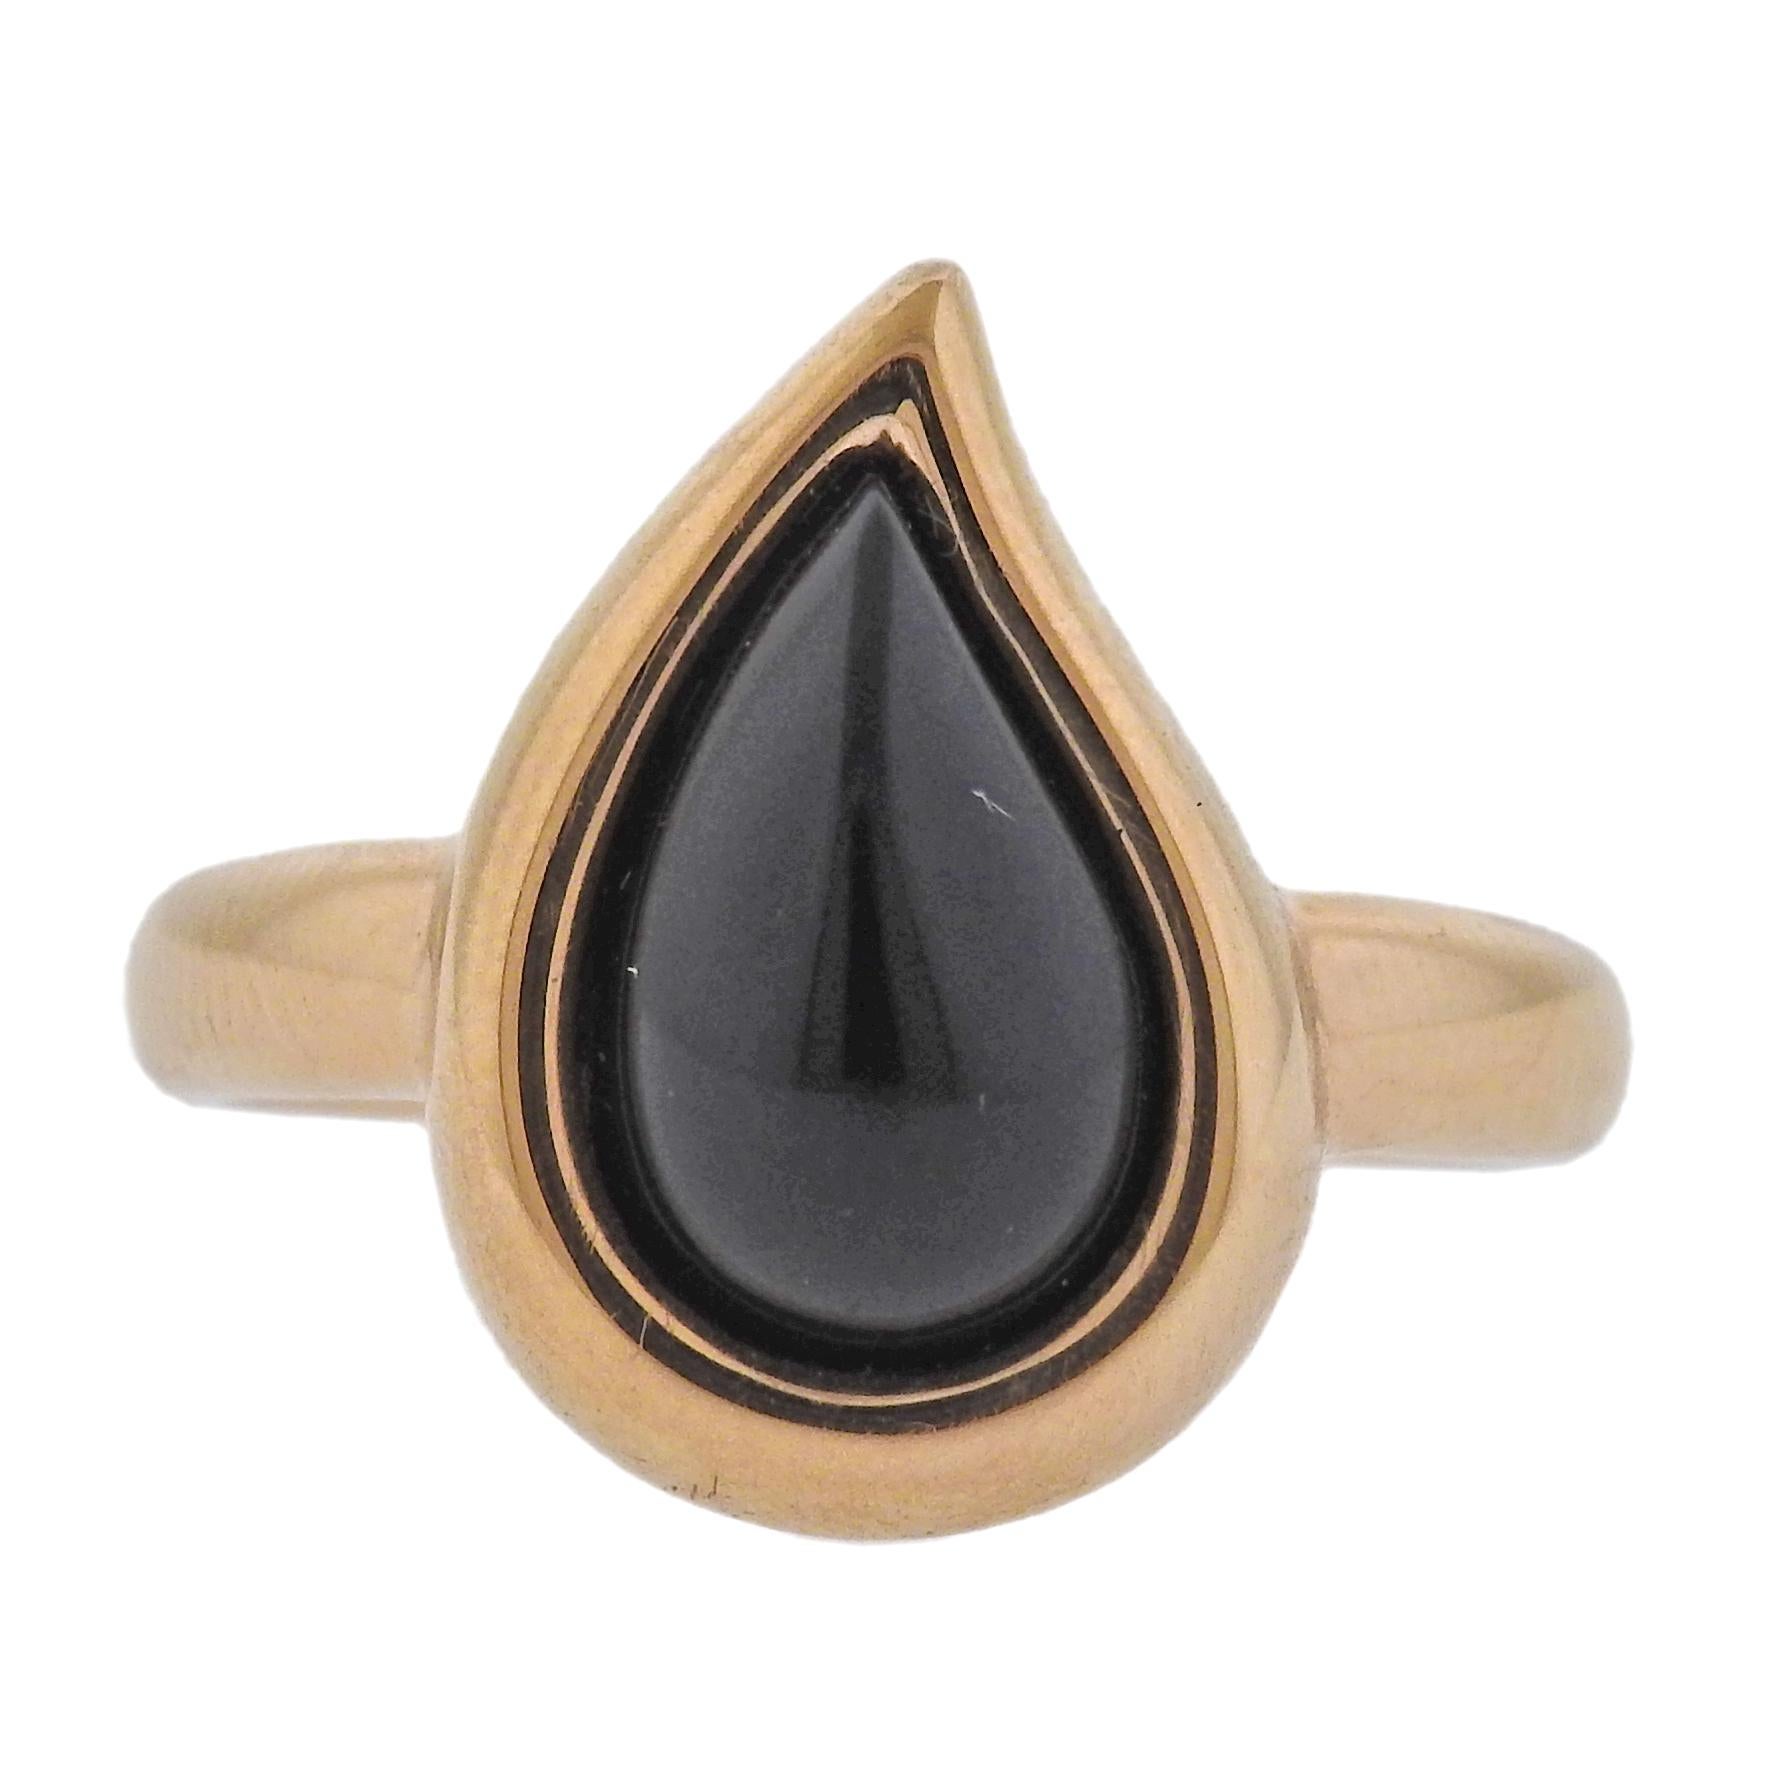 Brand new with tag Bucherer ring, in 18k gold with teardrop shaped 3.10ct onyx. Retail $3150. Comes with box.  Ring size - 8, ring top is 20mm x 14mm. Weight - 9.7 grams. Marked: CB 750.